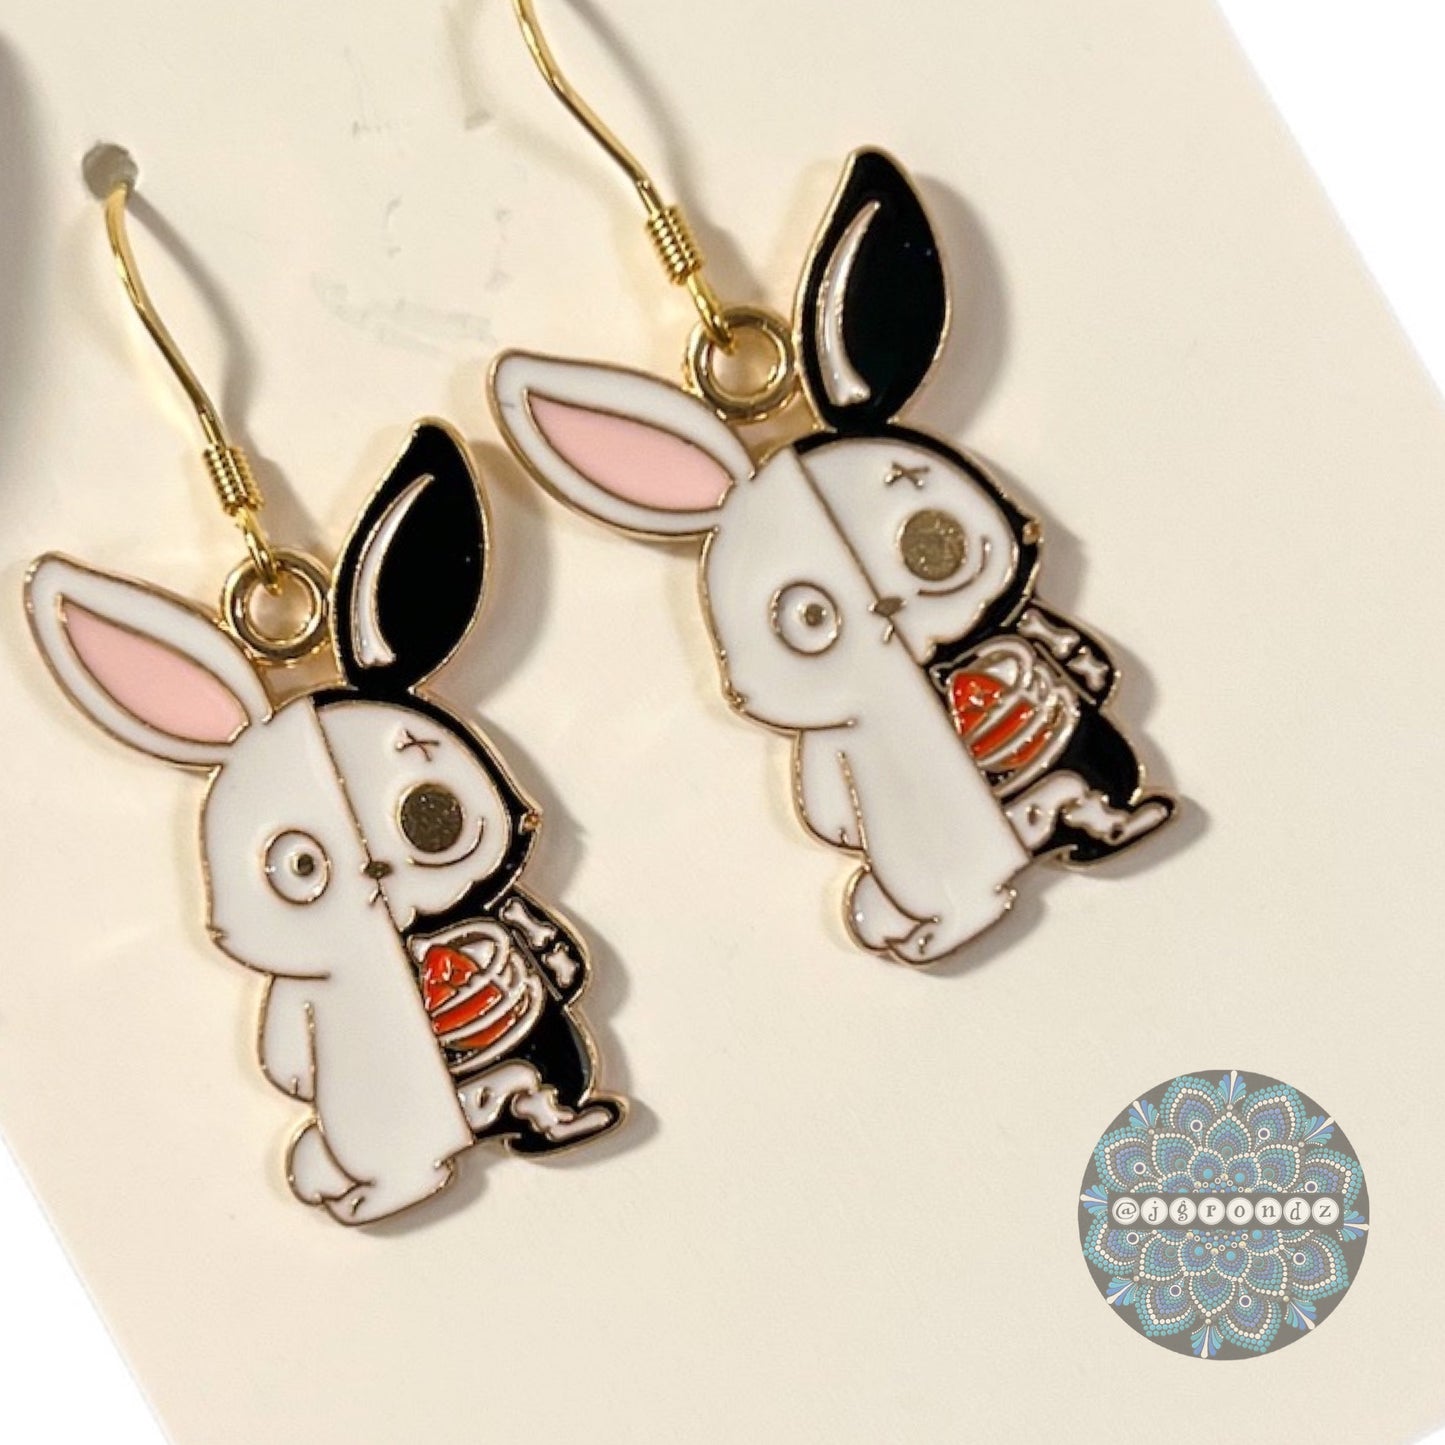 Skeleton Bunny Rabbit Earrings with 18k gold plated Fish Hook Ear Wire for Halloween